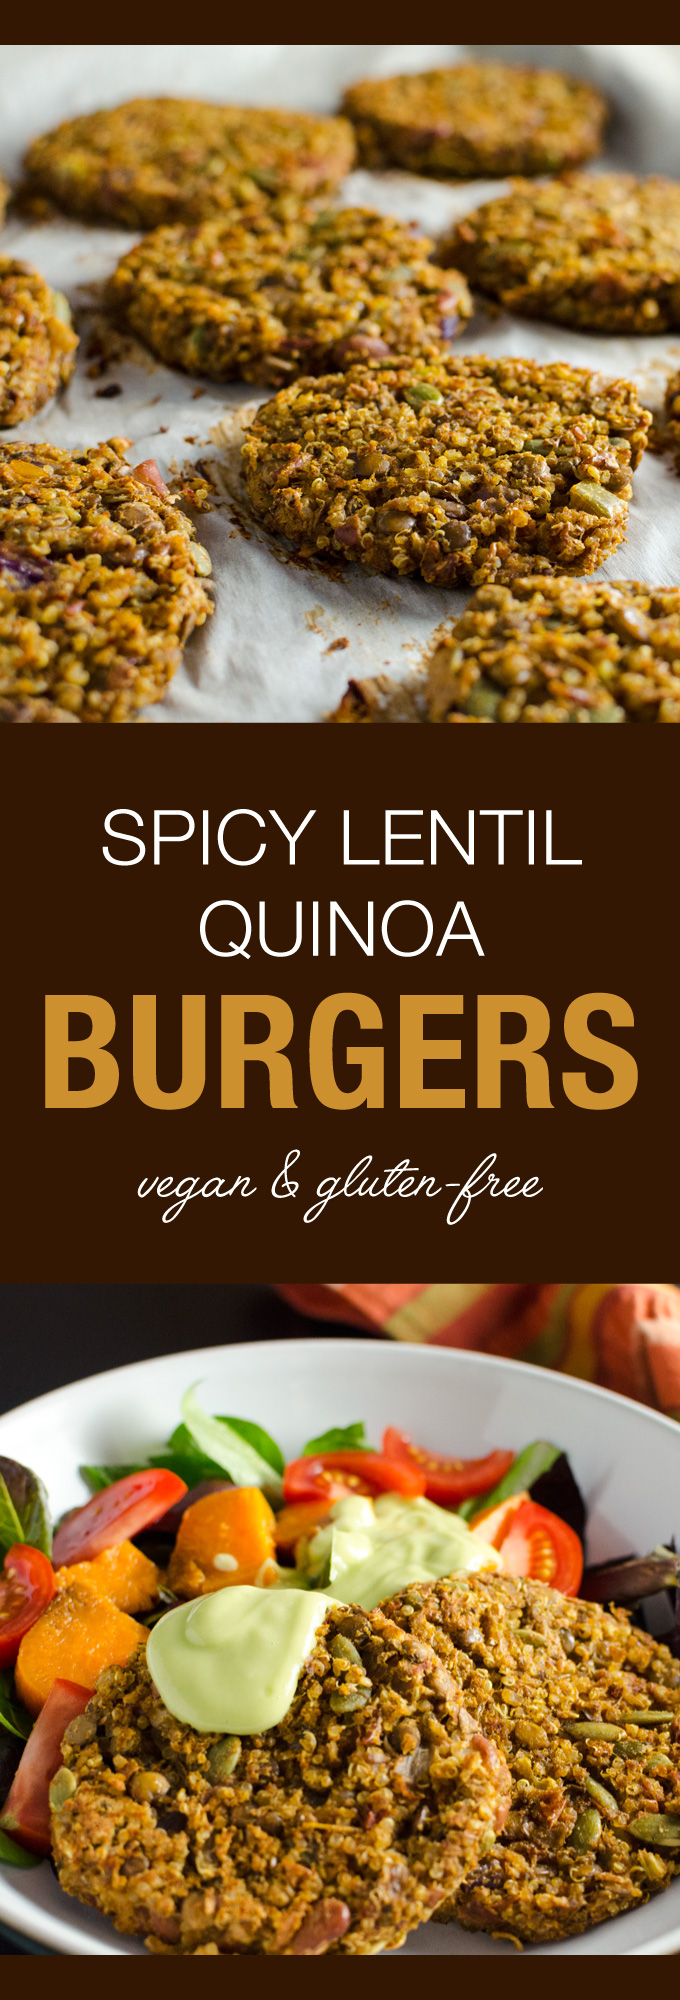 Spicy Lentil Quinoa Burgers with avocado dressing - these gluten-free vegan veggie patties offer a flavorful blend of protein-rich plant-based ingredients with a little kick. | VeggiePrimer.com